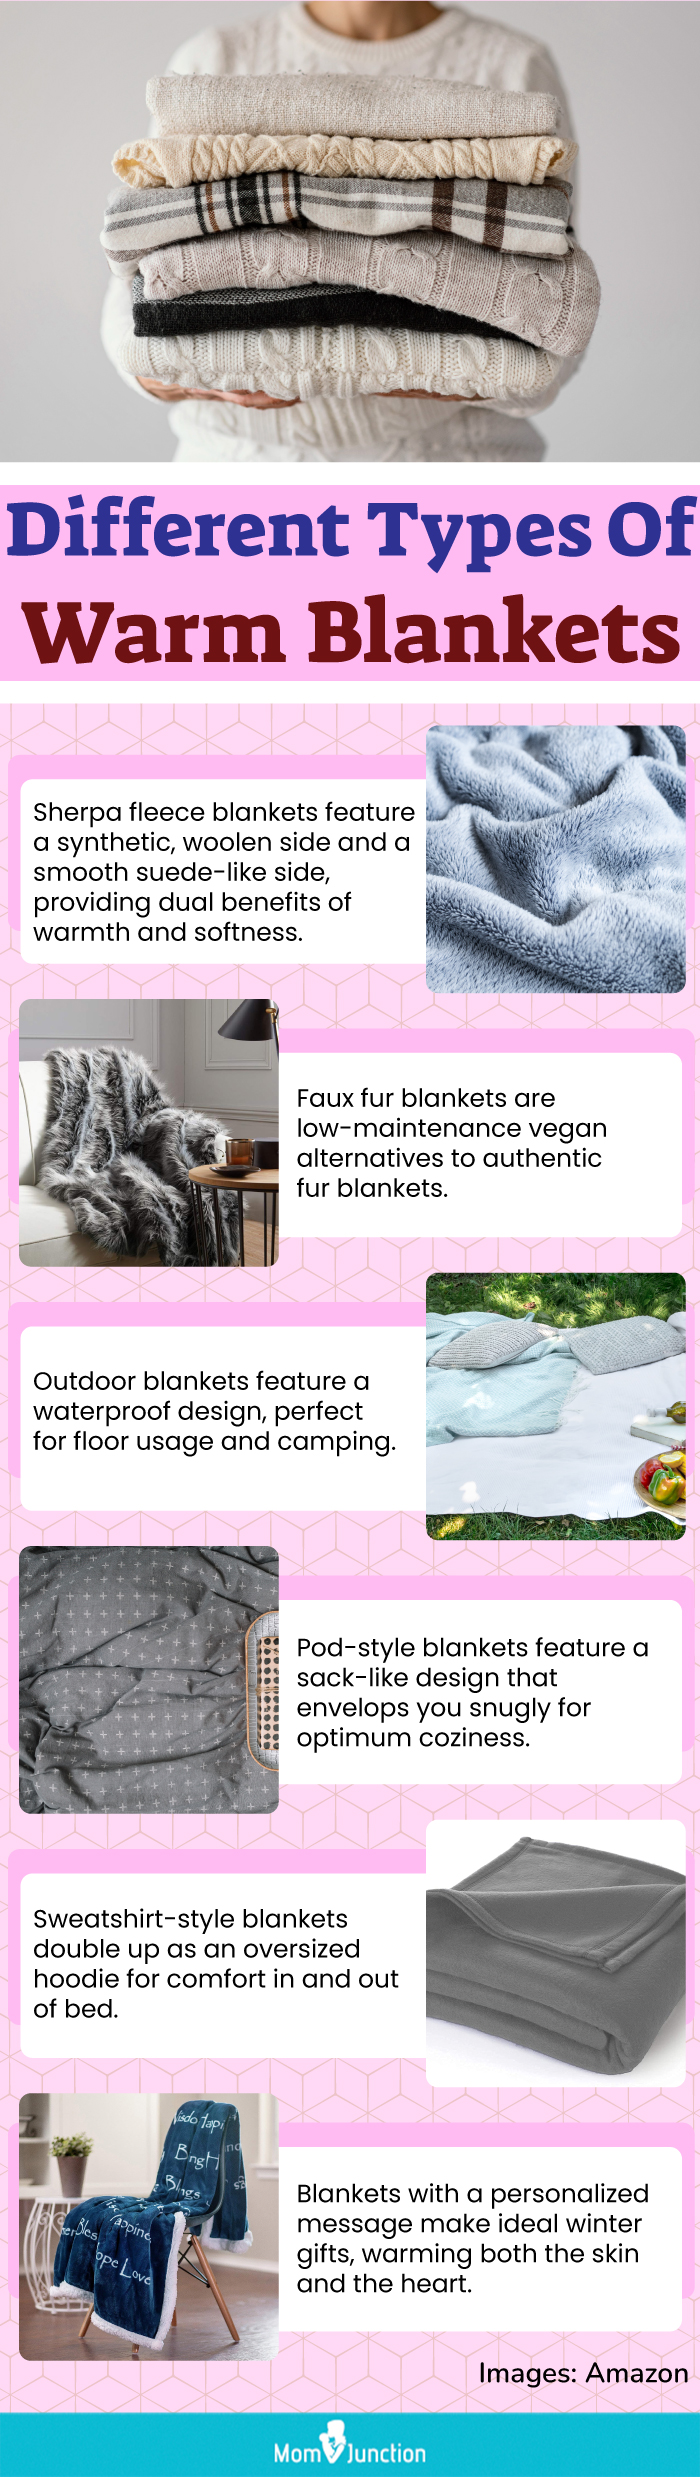 Different Types Of Warm Blankets (infographic)